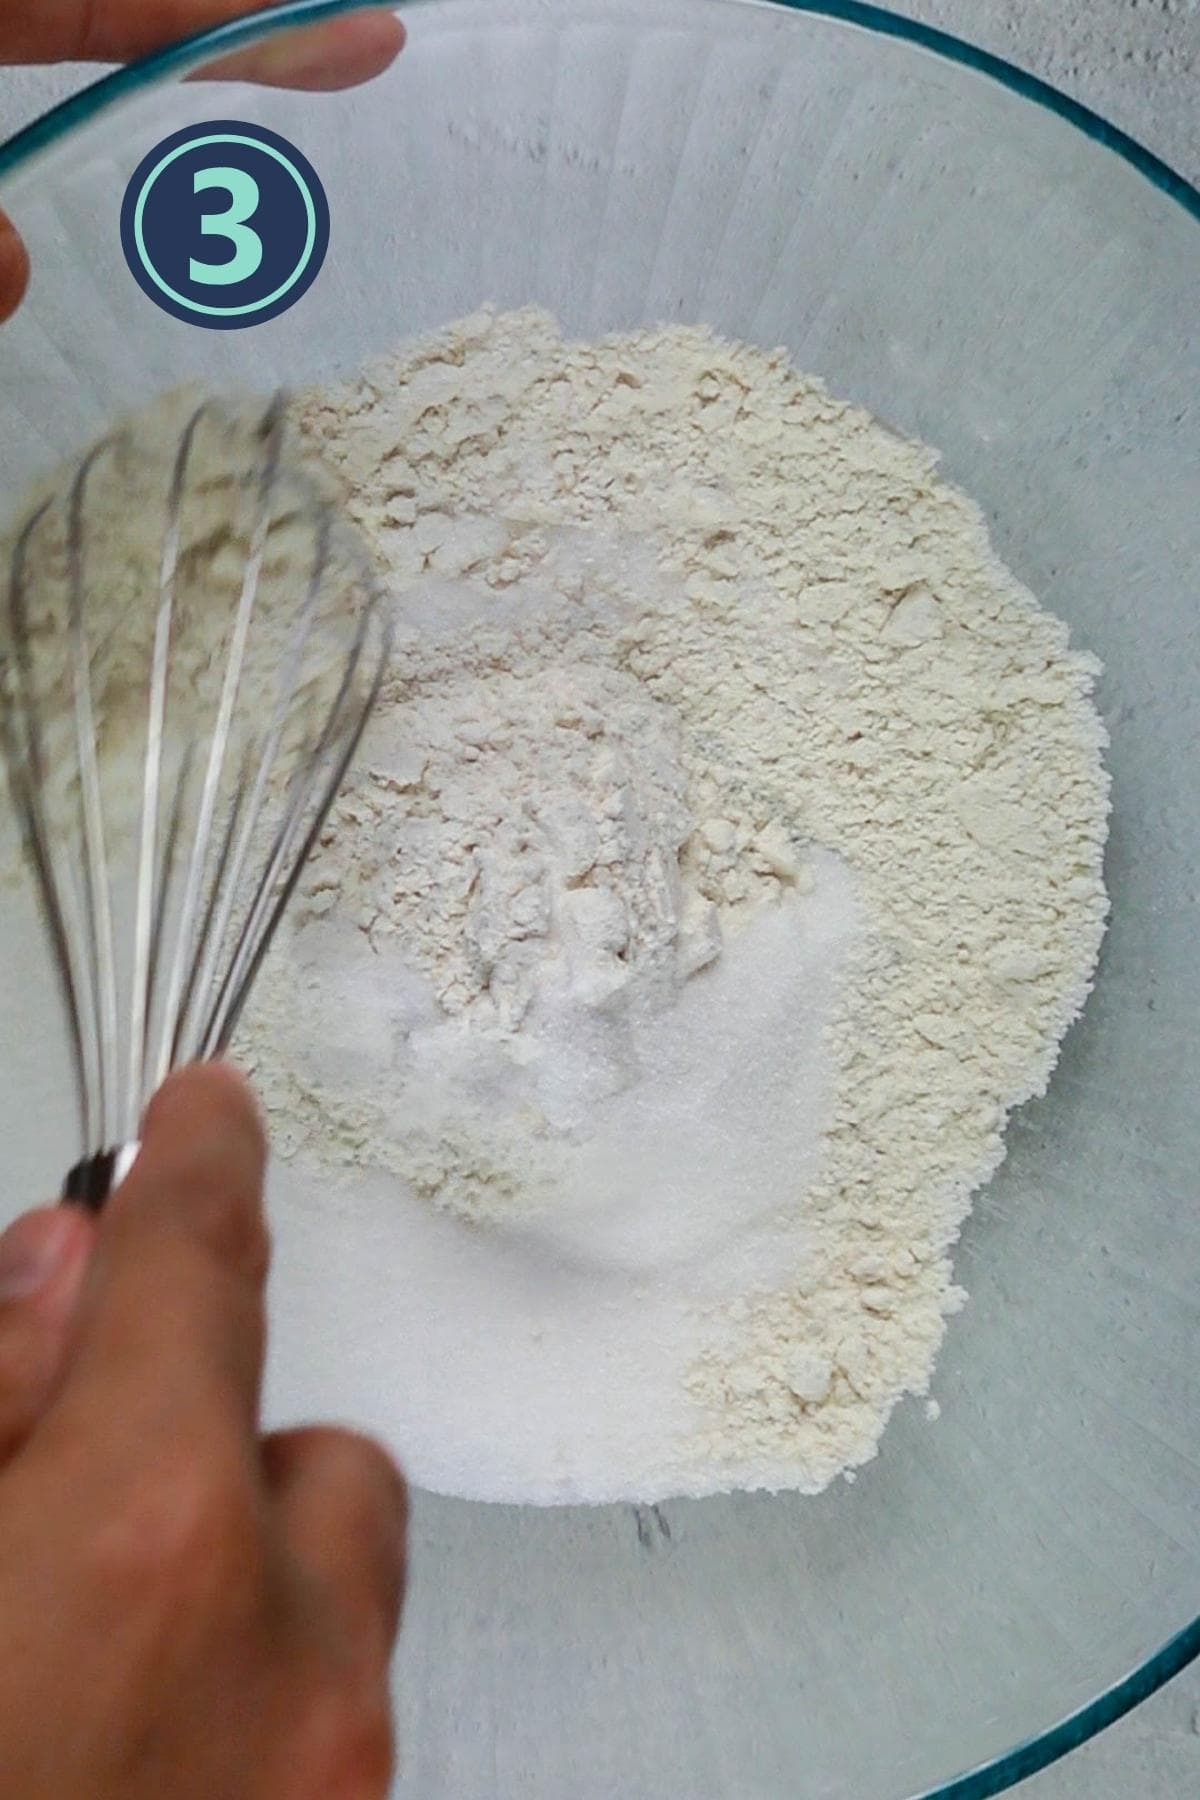 mixing the sugar and dry ingredients using a whisk.